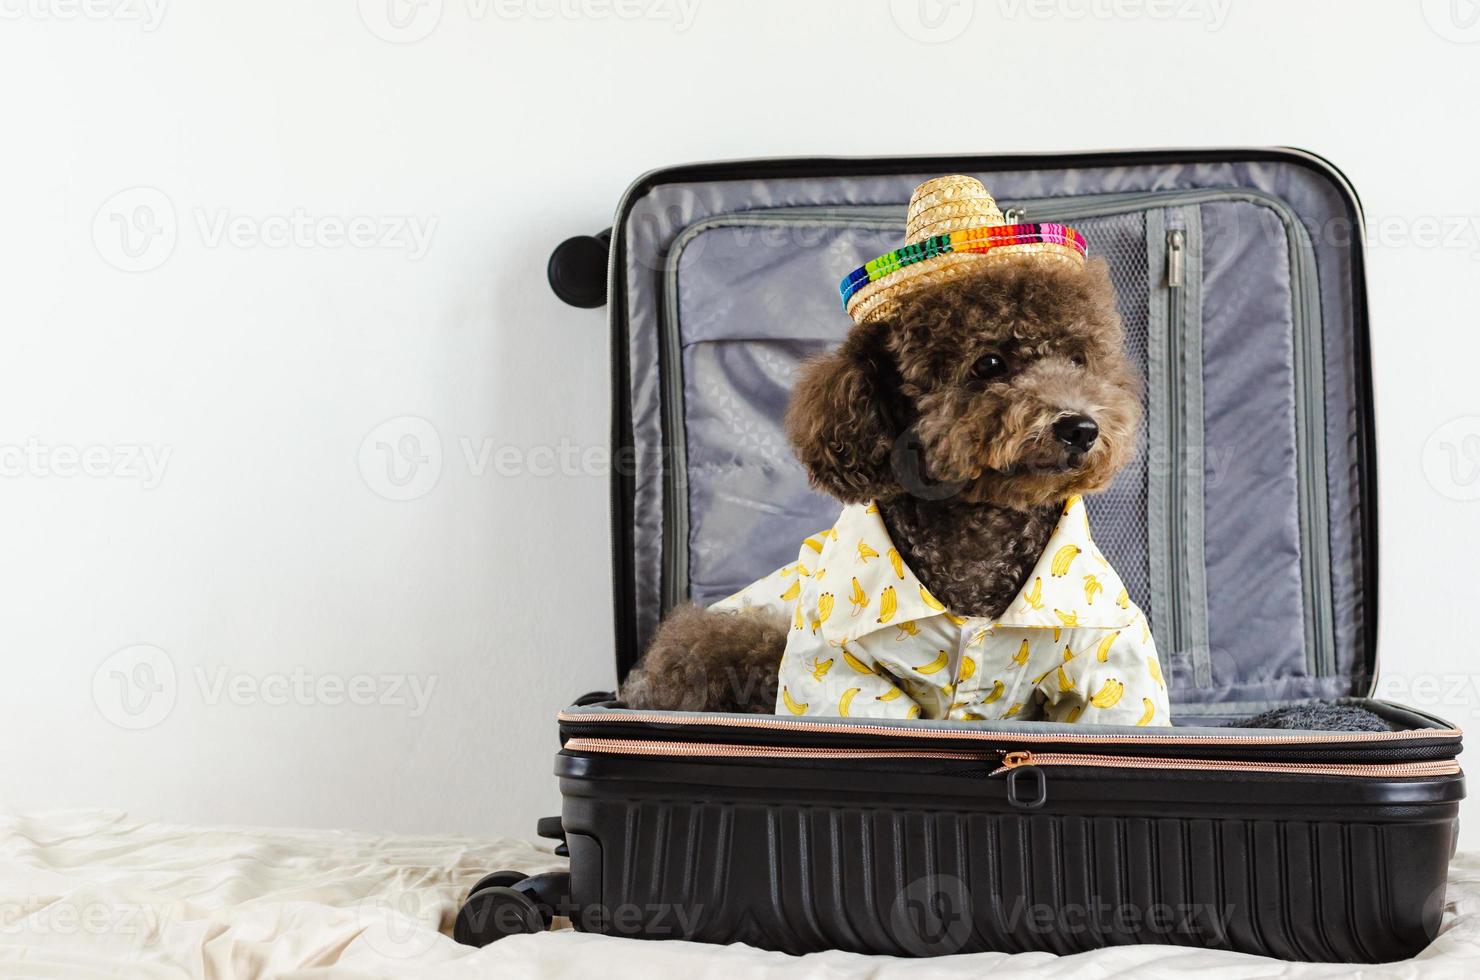 An adorable black Poodle dog wearing hat and dress for summer when going to travel photo